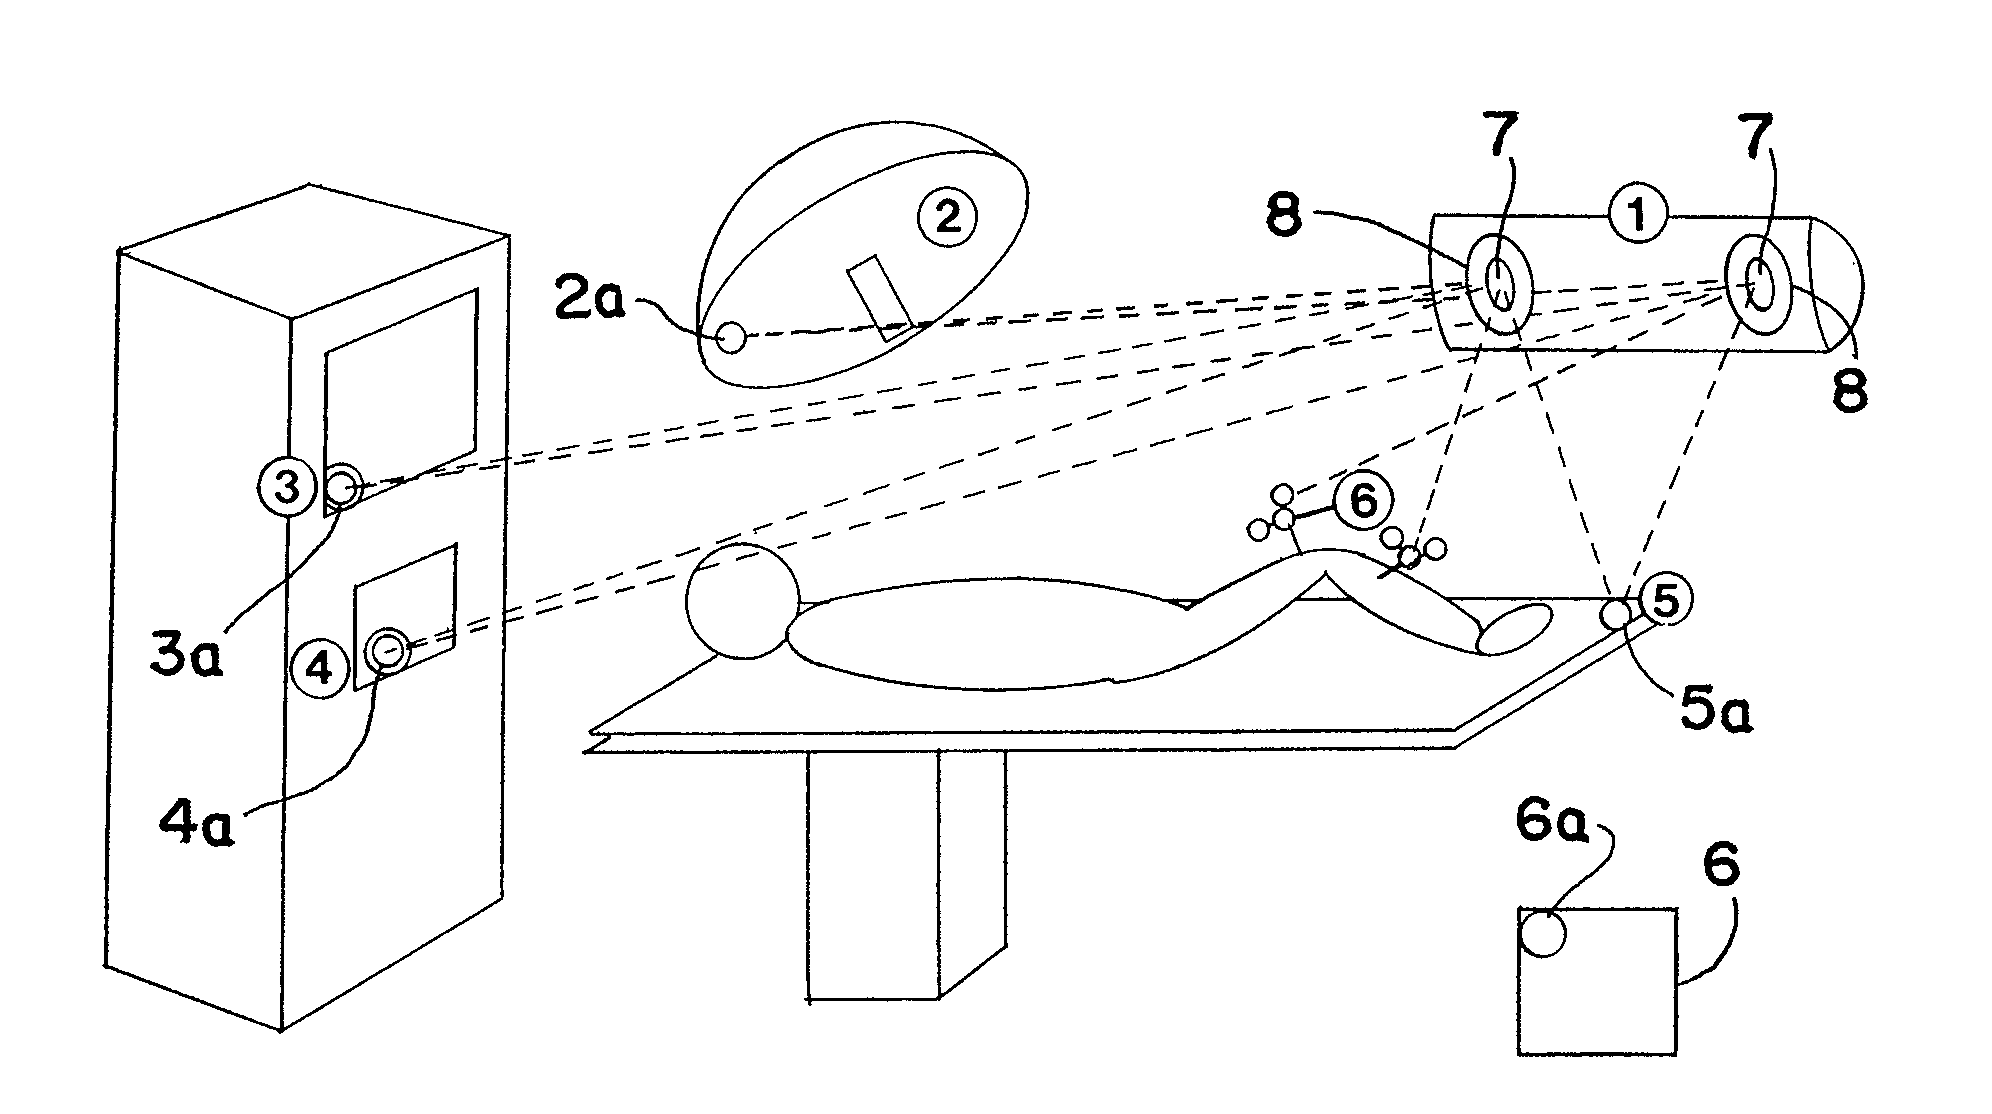 Medical tracking system with infrared data transfer